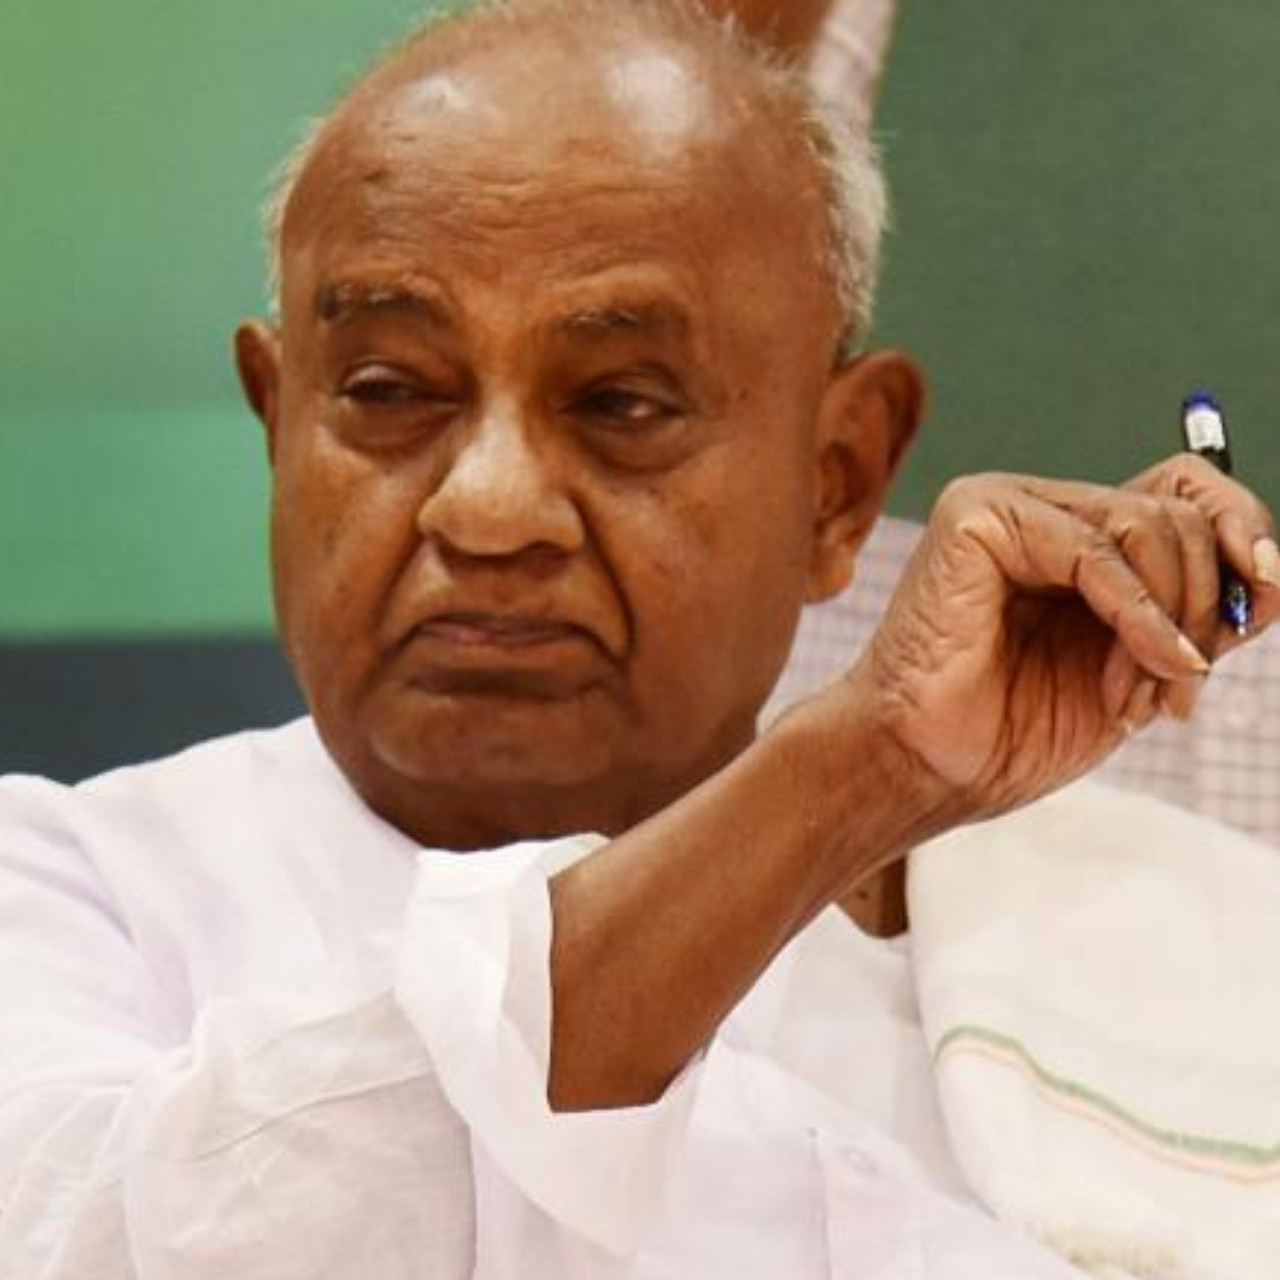 Former Prime Minister and JD (S) leader HD Deve Gowda Corona positive